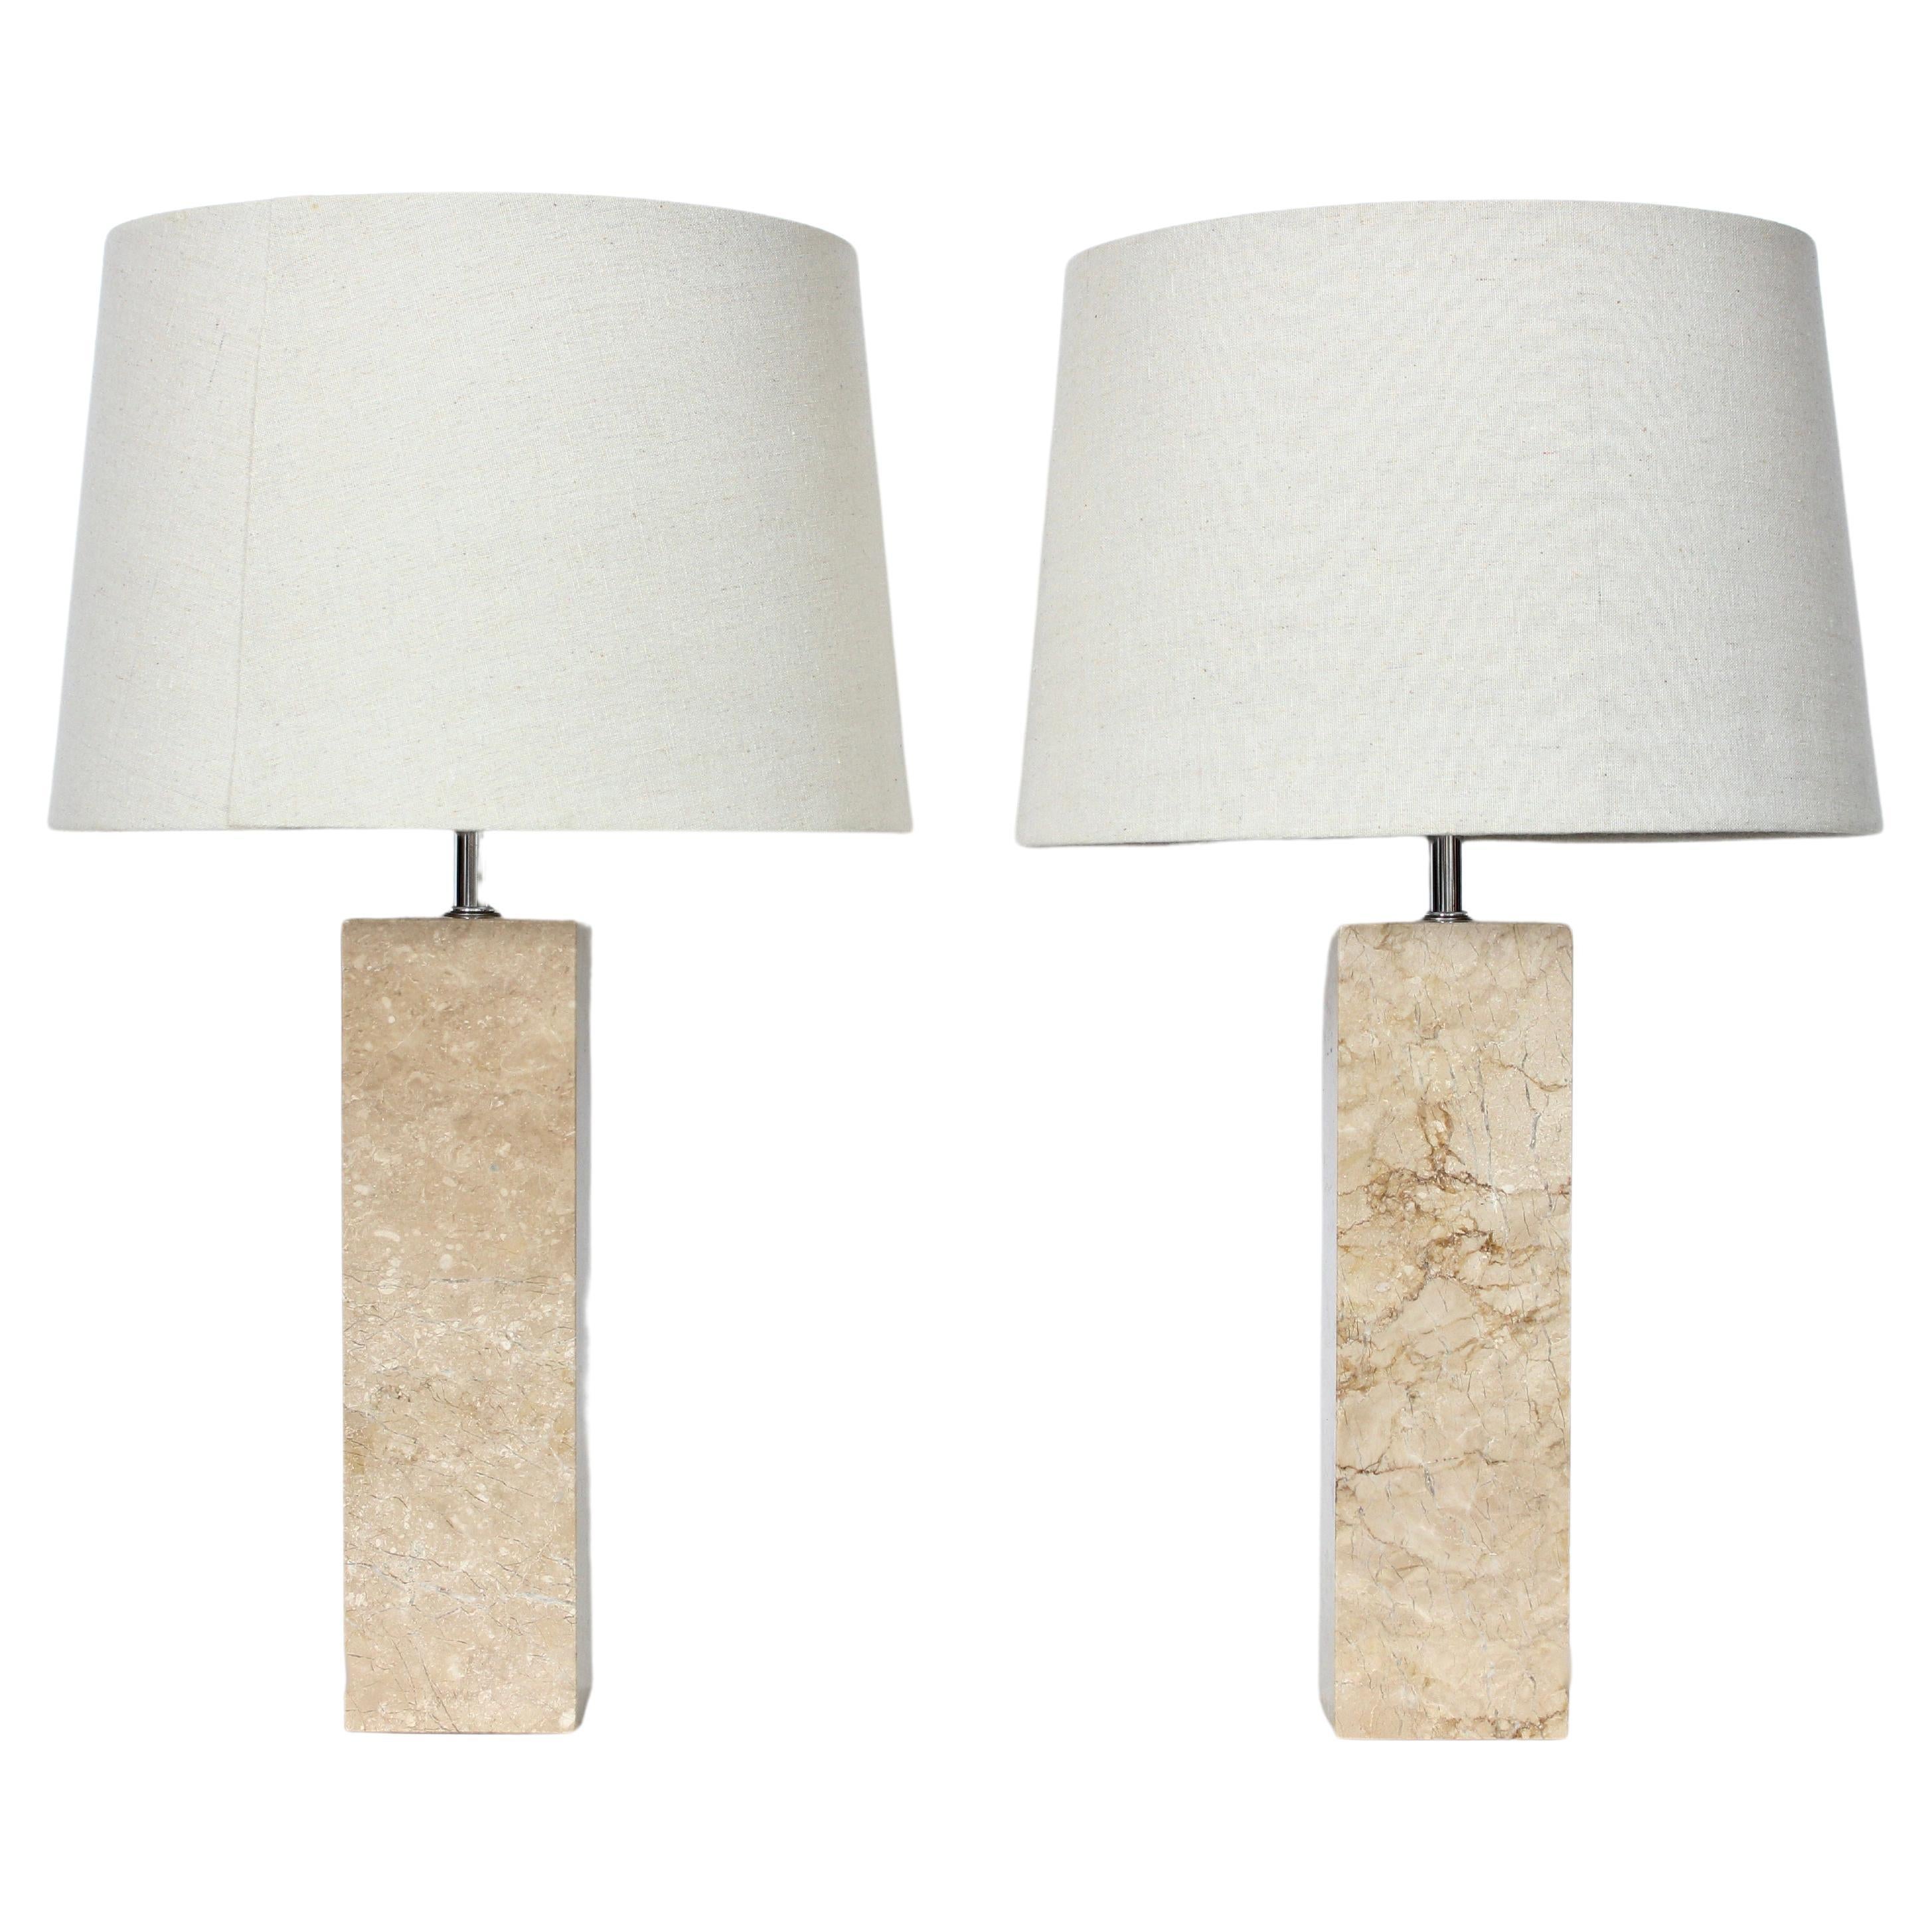 Pair of George Kovacs Tan Solid Travertine Table Lamps, 1970's